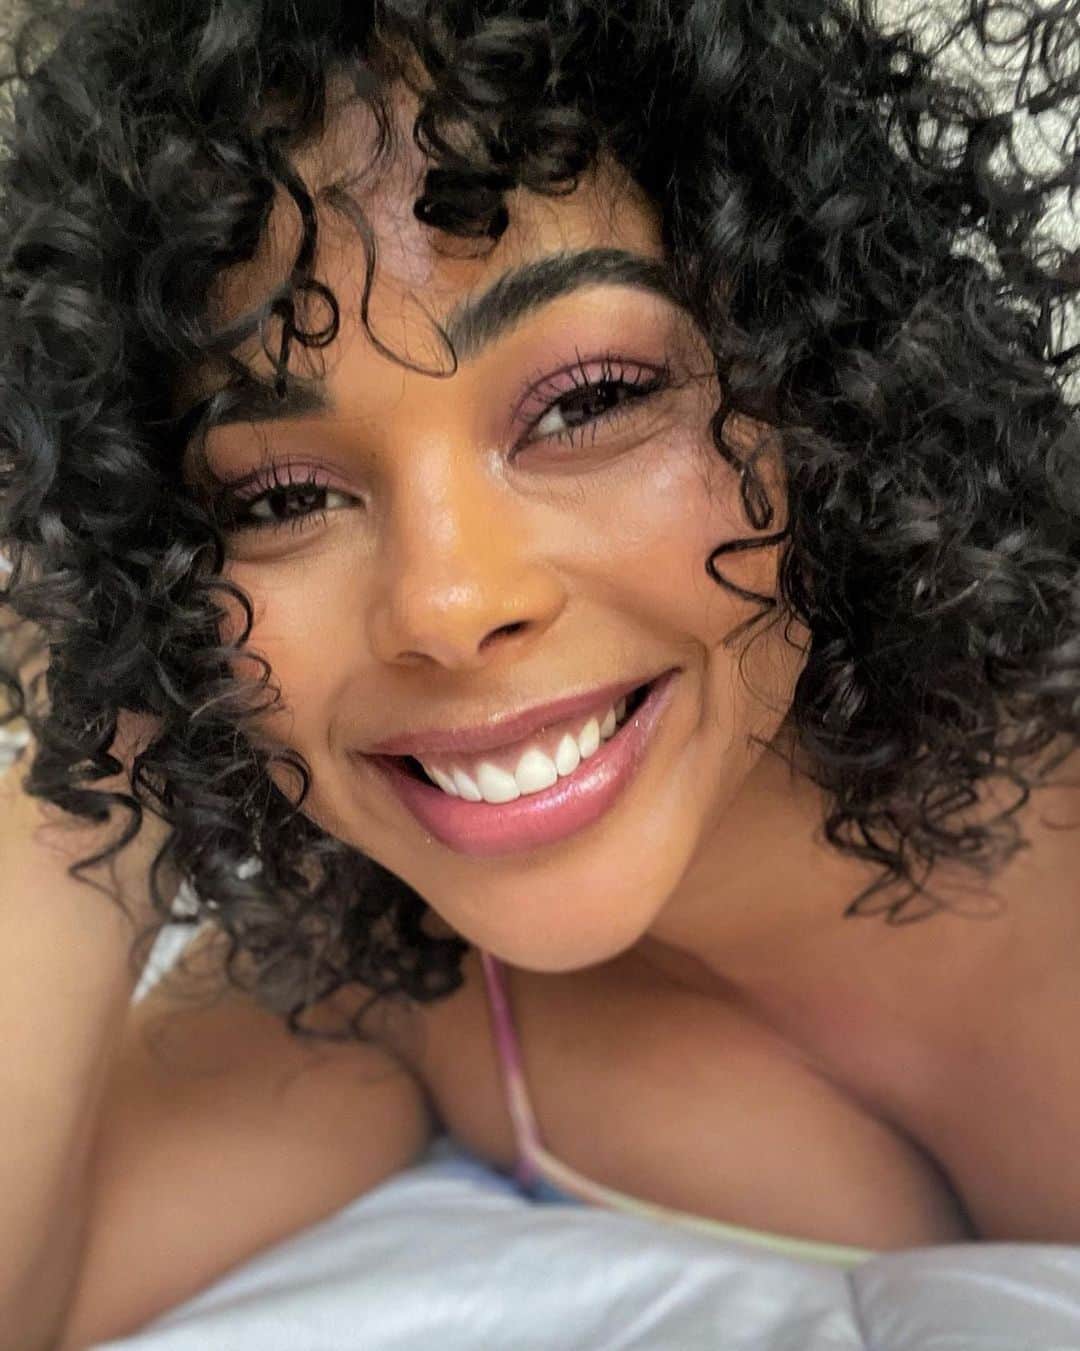 ipsyのインスタグラム：「@tabriamajors is a vision with this dewy, rosy glow. 💖  #IPSYSendLove  Products Here: @anastasiabeverlyhills Luminous Foundation  @complexculturebeauty Angled Foundation Brush  @beautystat Universal C Skin Refiner  @makeupforever Aqua Resist Eyeliner  @aboutfacebeauty Fluid Eye Paint  #cosmetics #beauty #makeup #subscriptionbox #makeupsubscription #beautytips #beautyhacks #beautyobsessed #beautycommunity #beautybox #makeuptutorials #makeuplooks #ipsymakeup #selflove #selfcare #ipsyglambag」